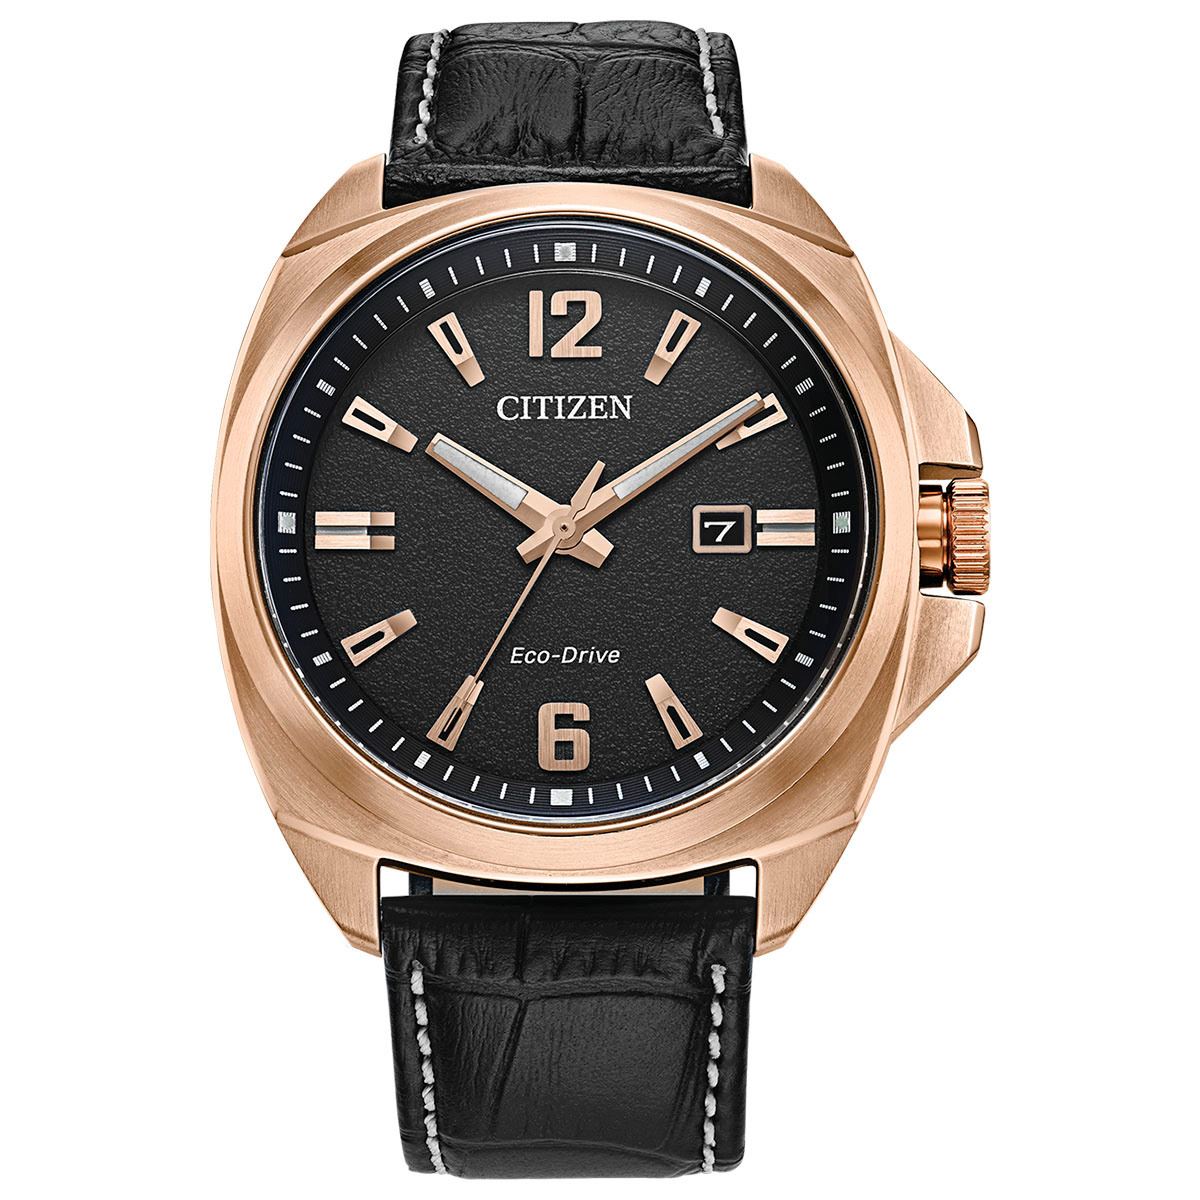 Relojes Orient: Calidad y Asequibilidad - The Global Citizen